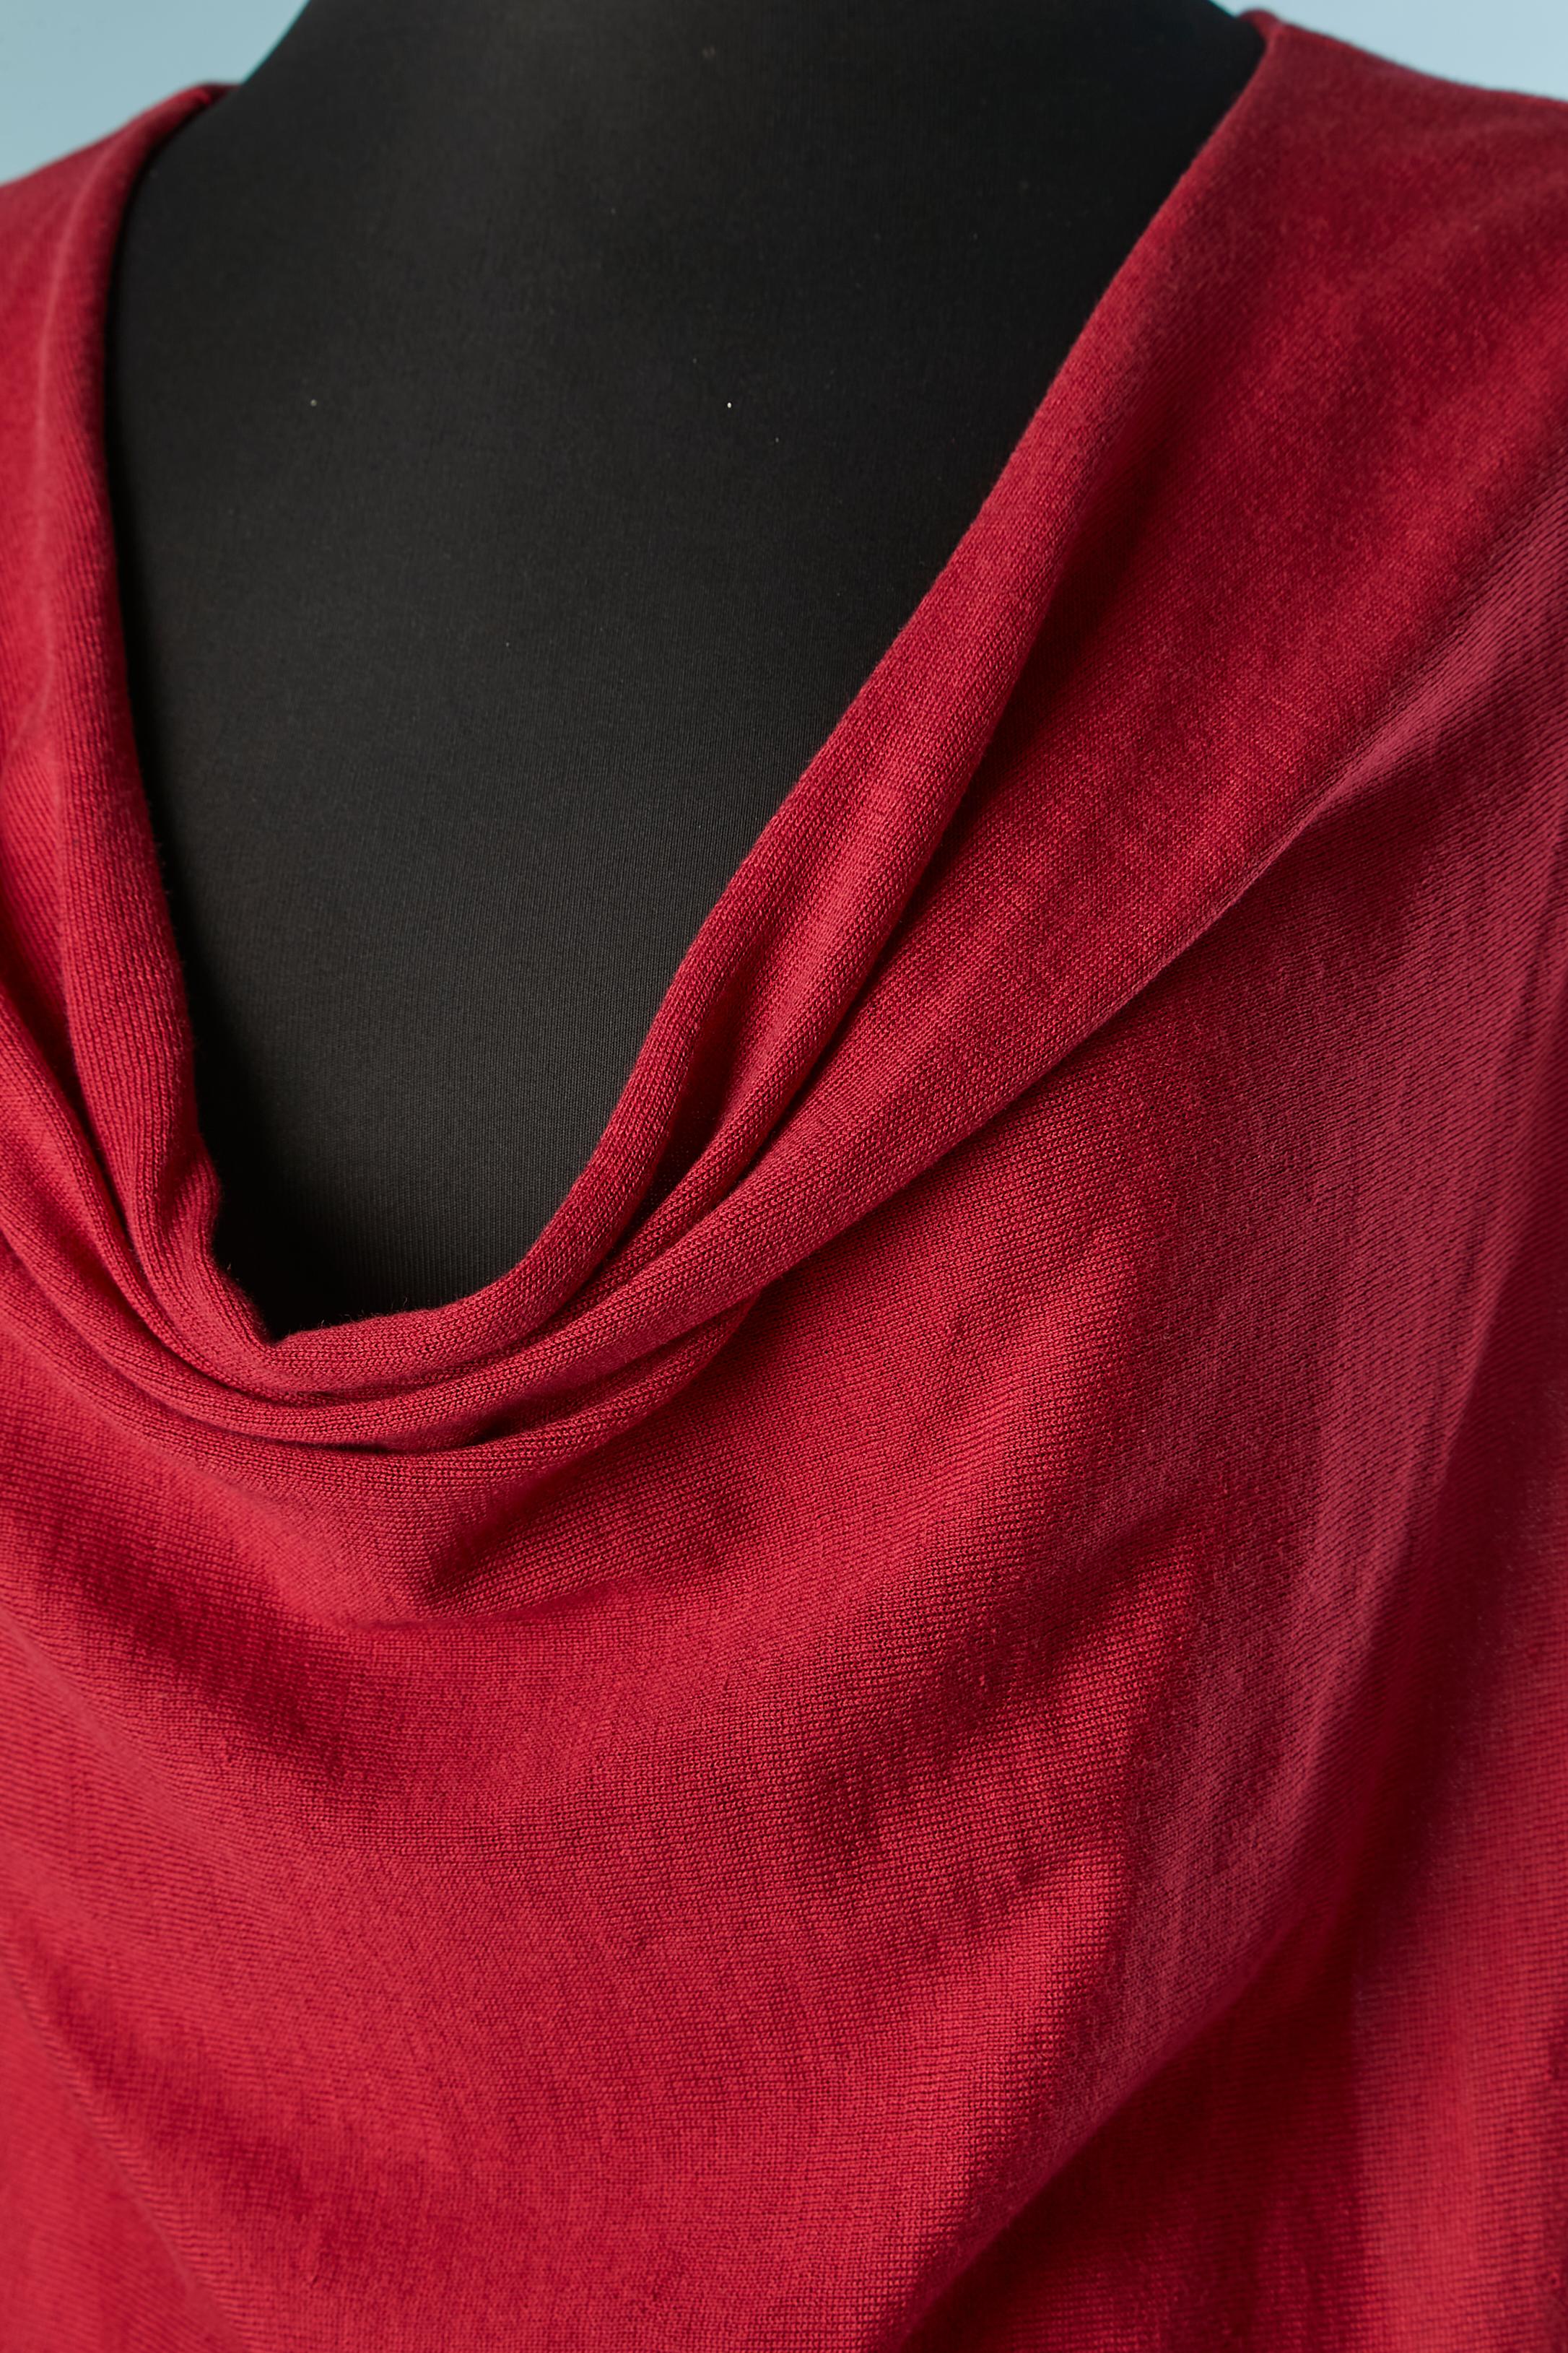 Red silk and cotton sleeveless sweater. Knit composition: 50% cotton, 50% silk.
Draped on the bust. 
SIZE L 